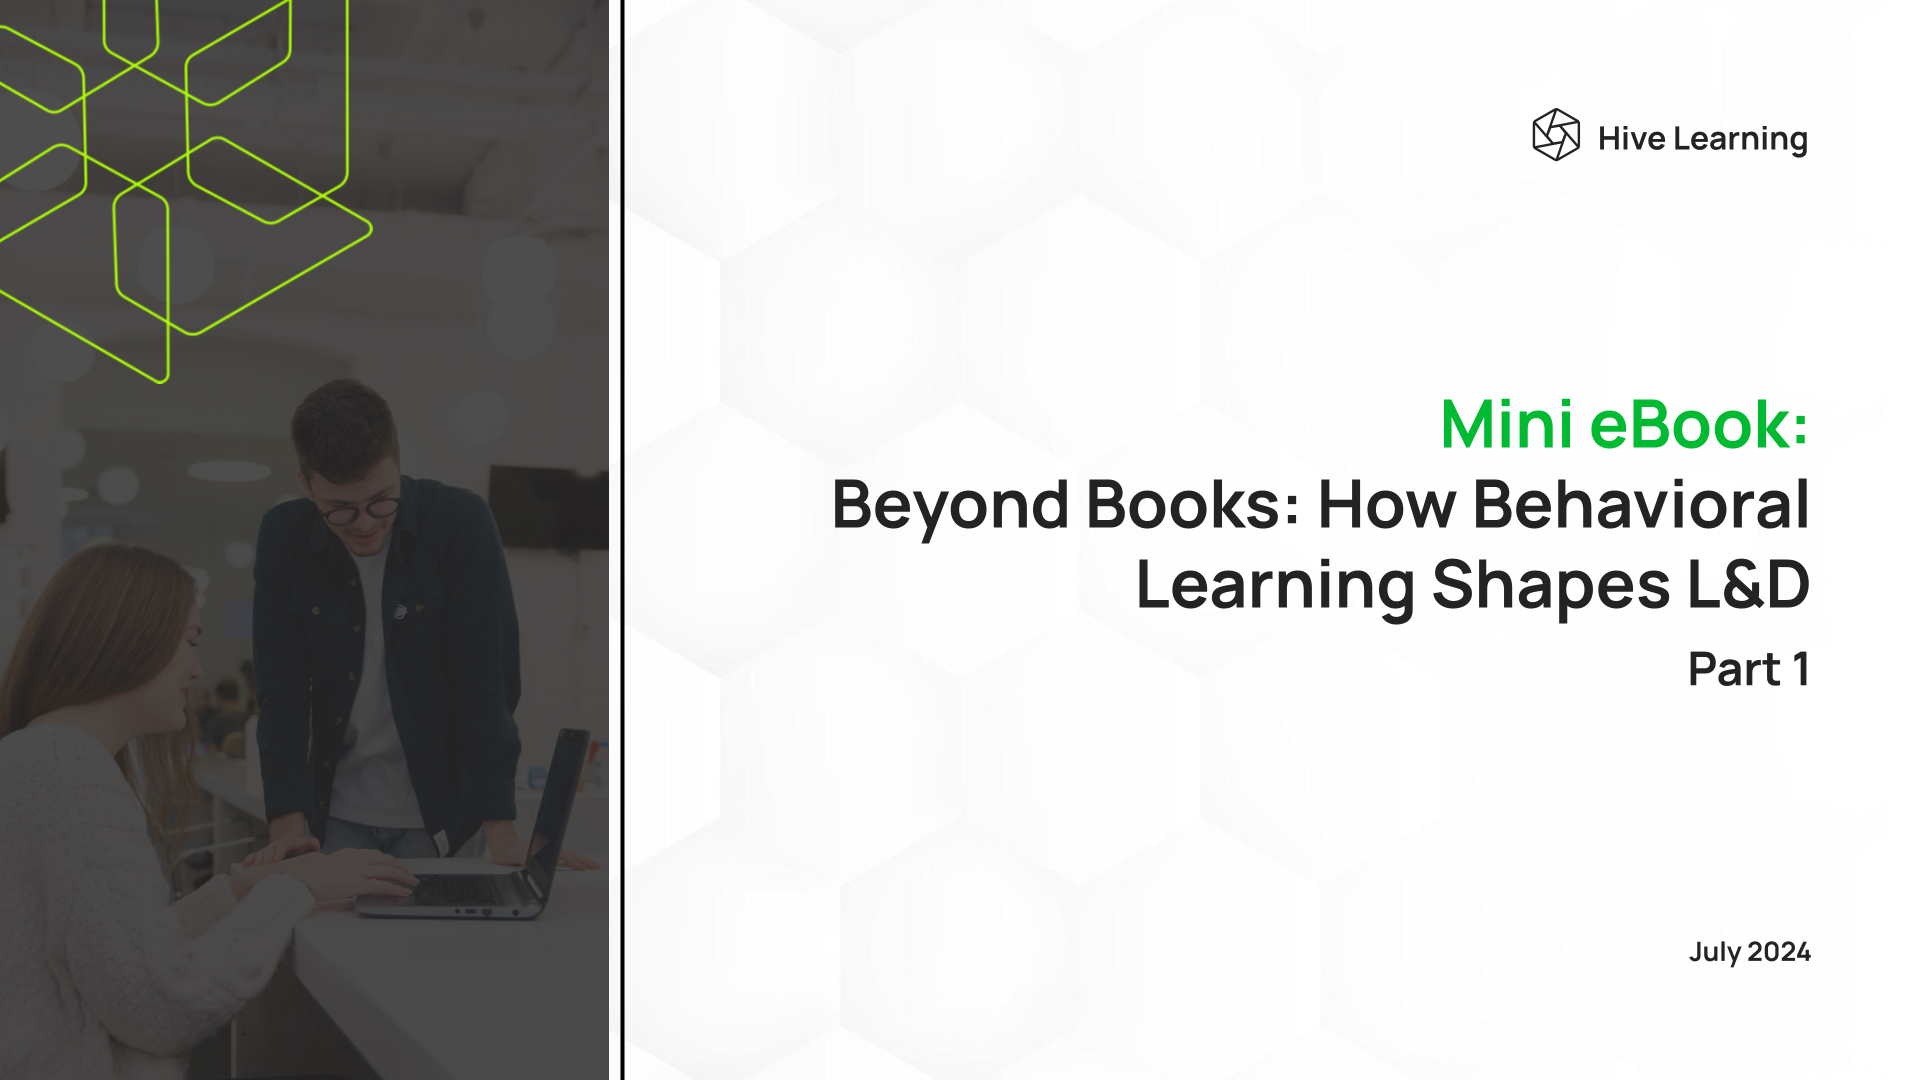 Hive Learning Mini eBook (US) - Part 1 Beyond Books How Behavioral Learning Shapes L&D